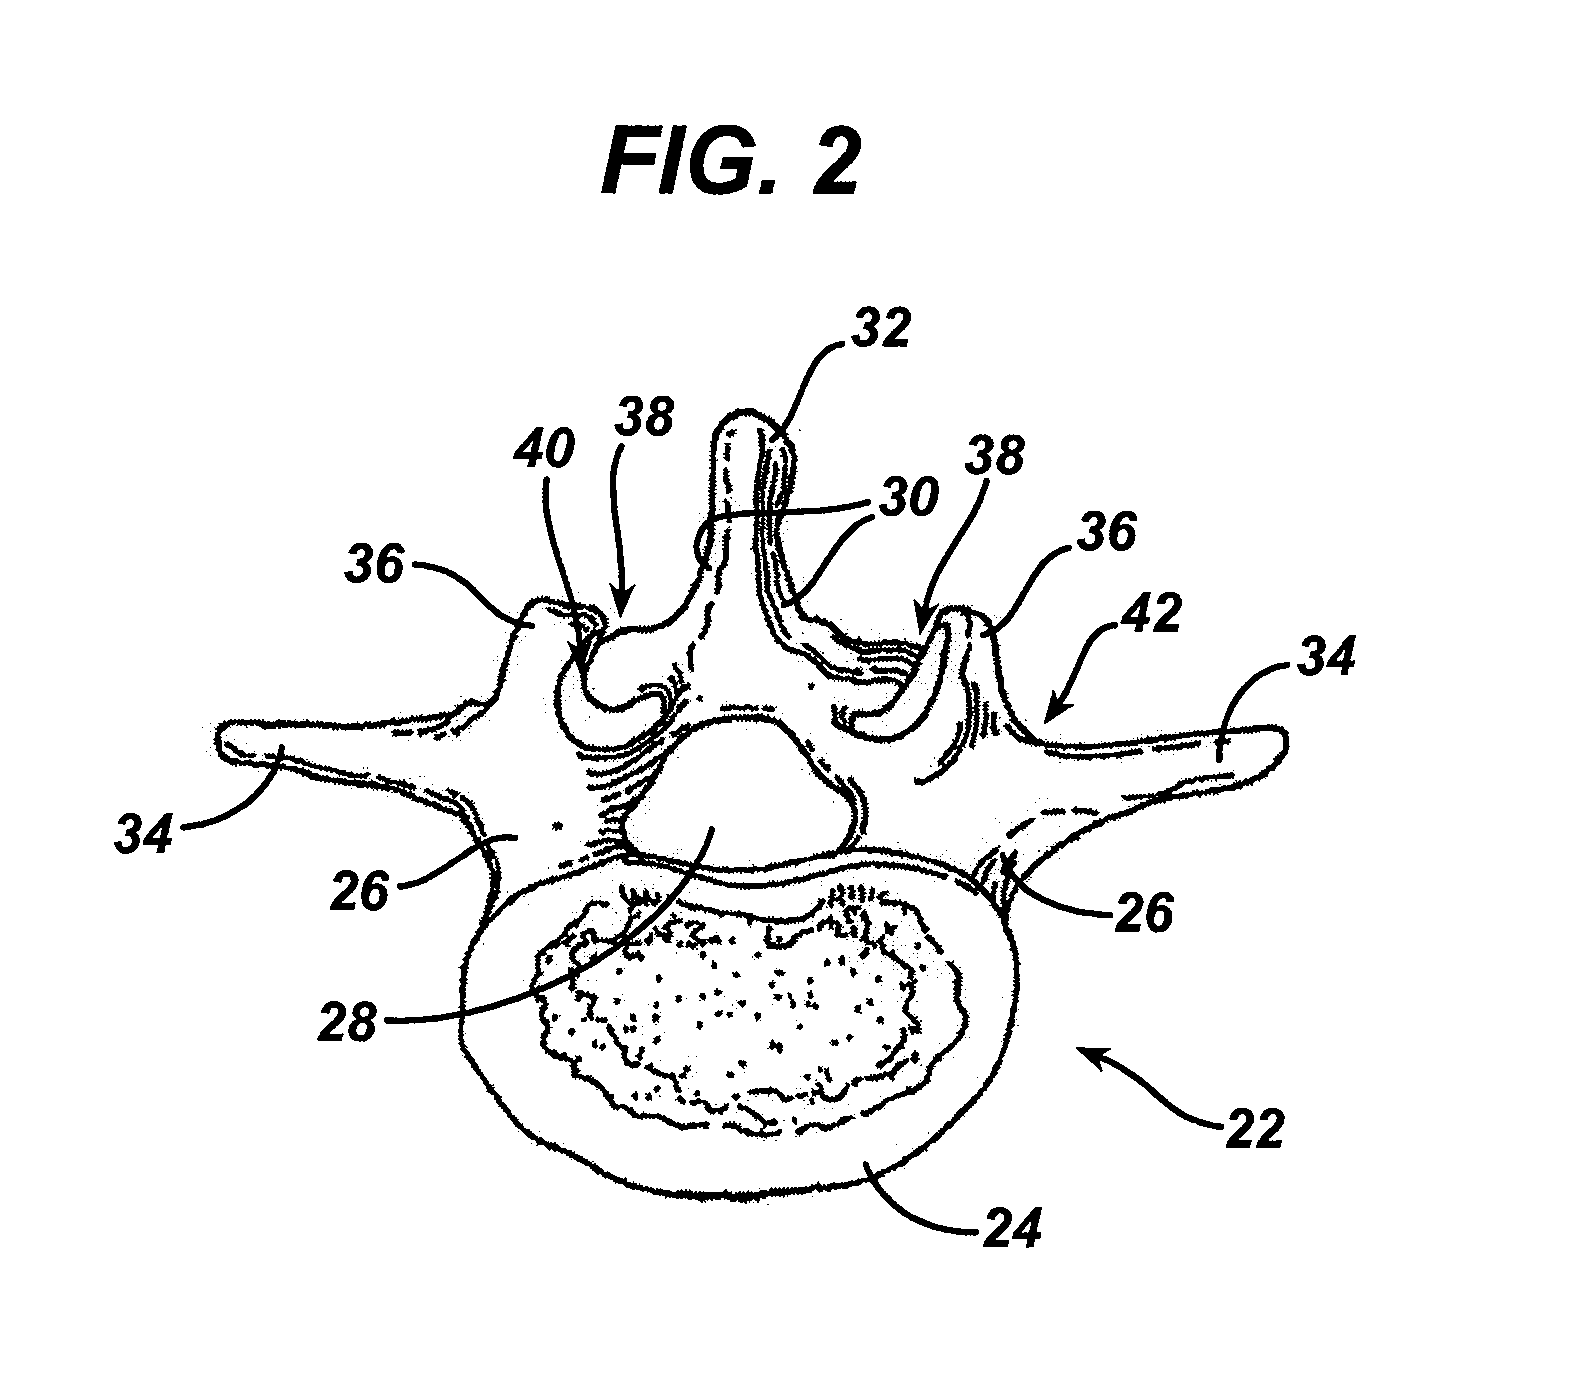 Intra-facet fixation device and method of use